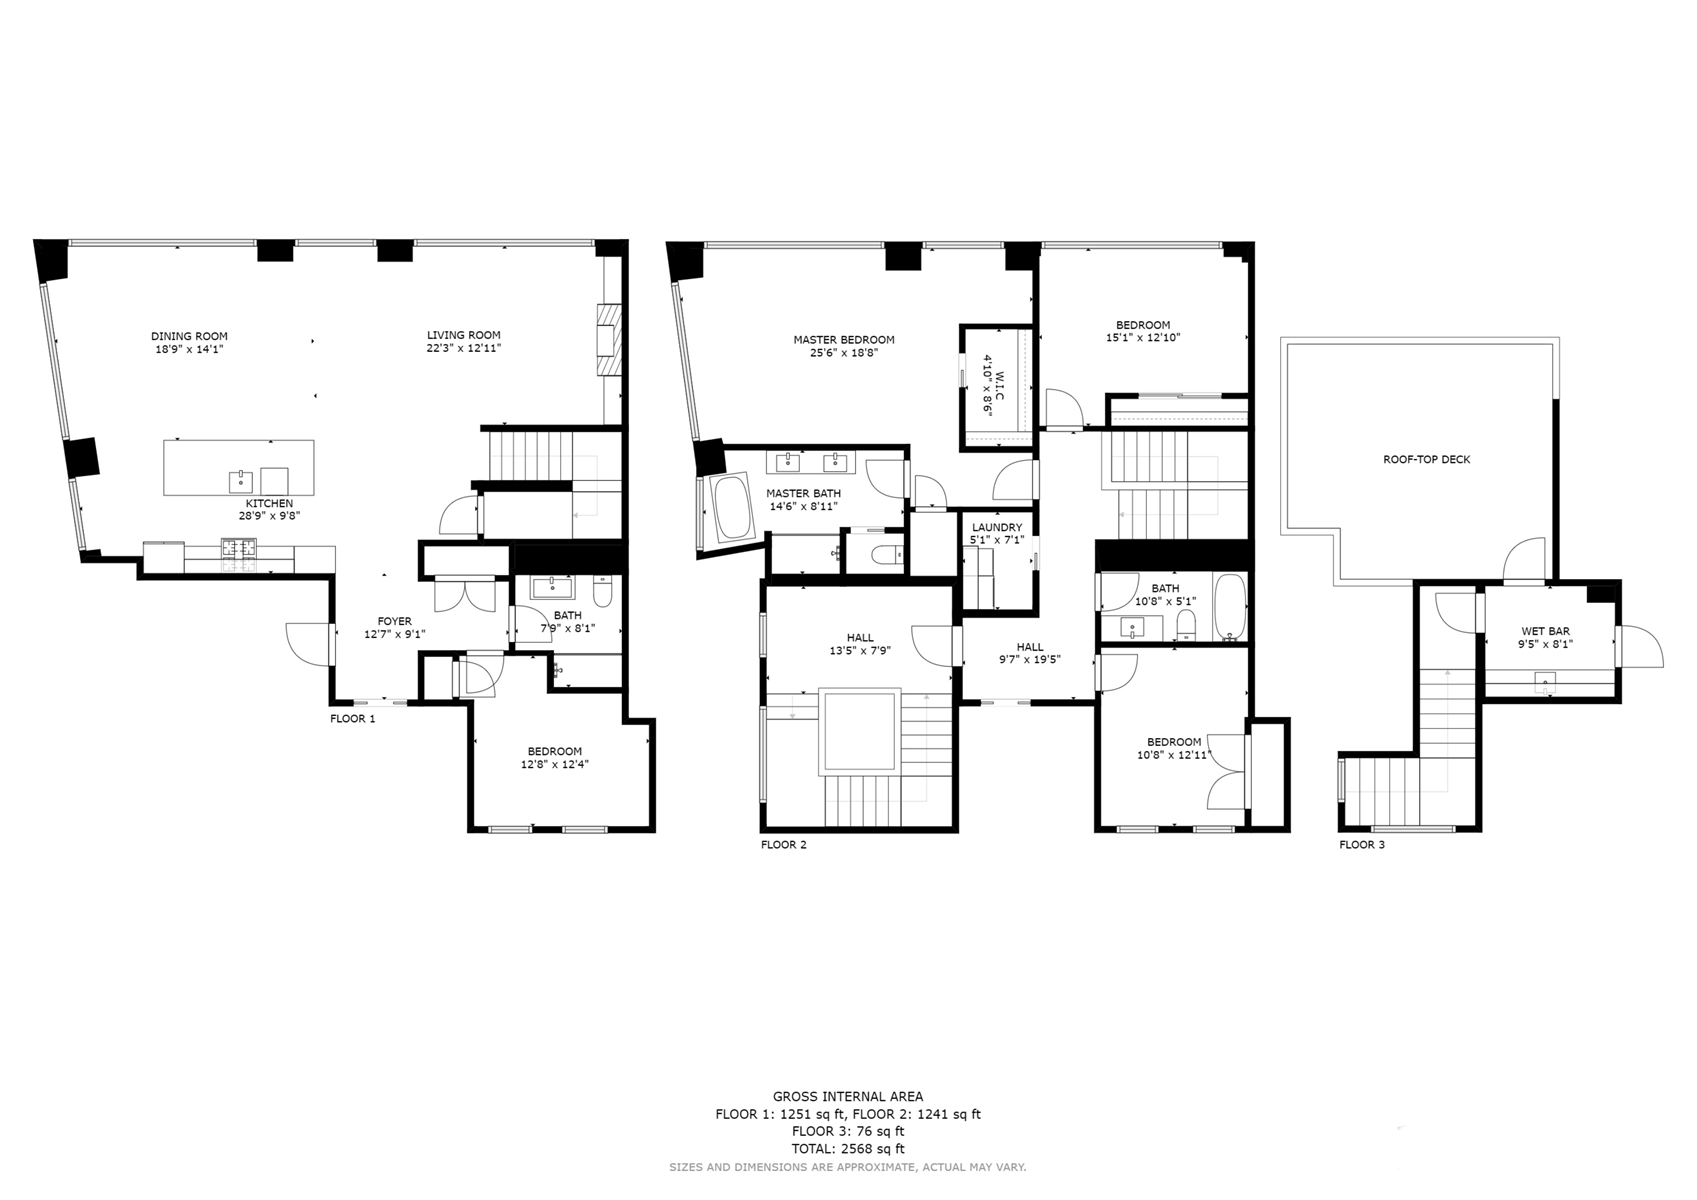 Floor Plan for Luxurious three bedroom and an office on the top 2 floors with private roof deck!